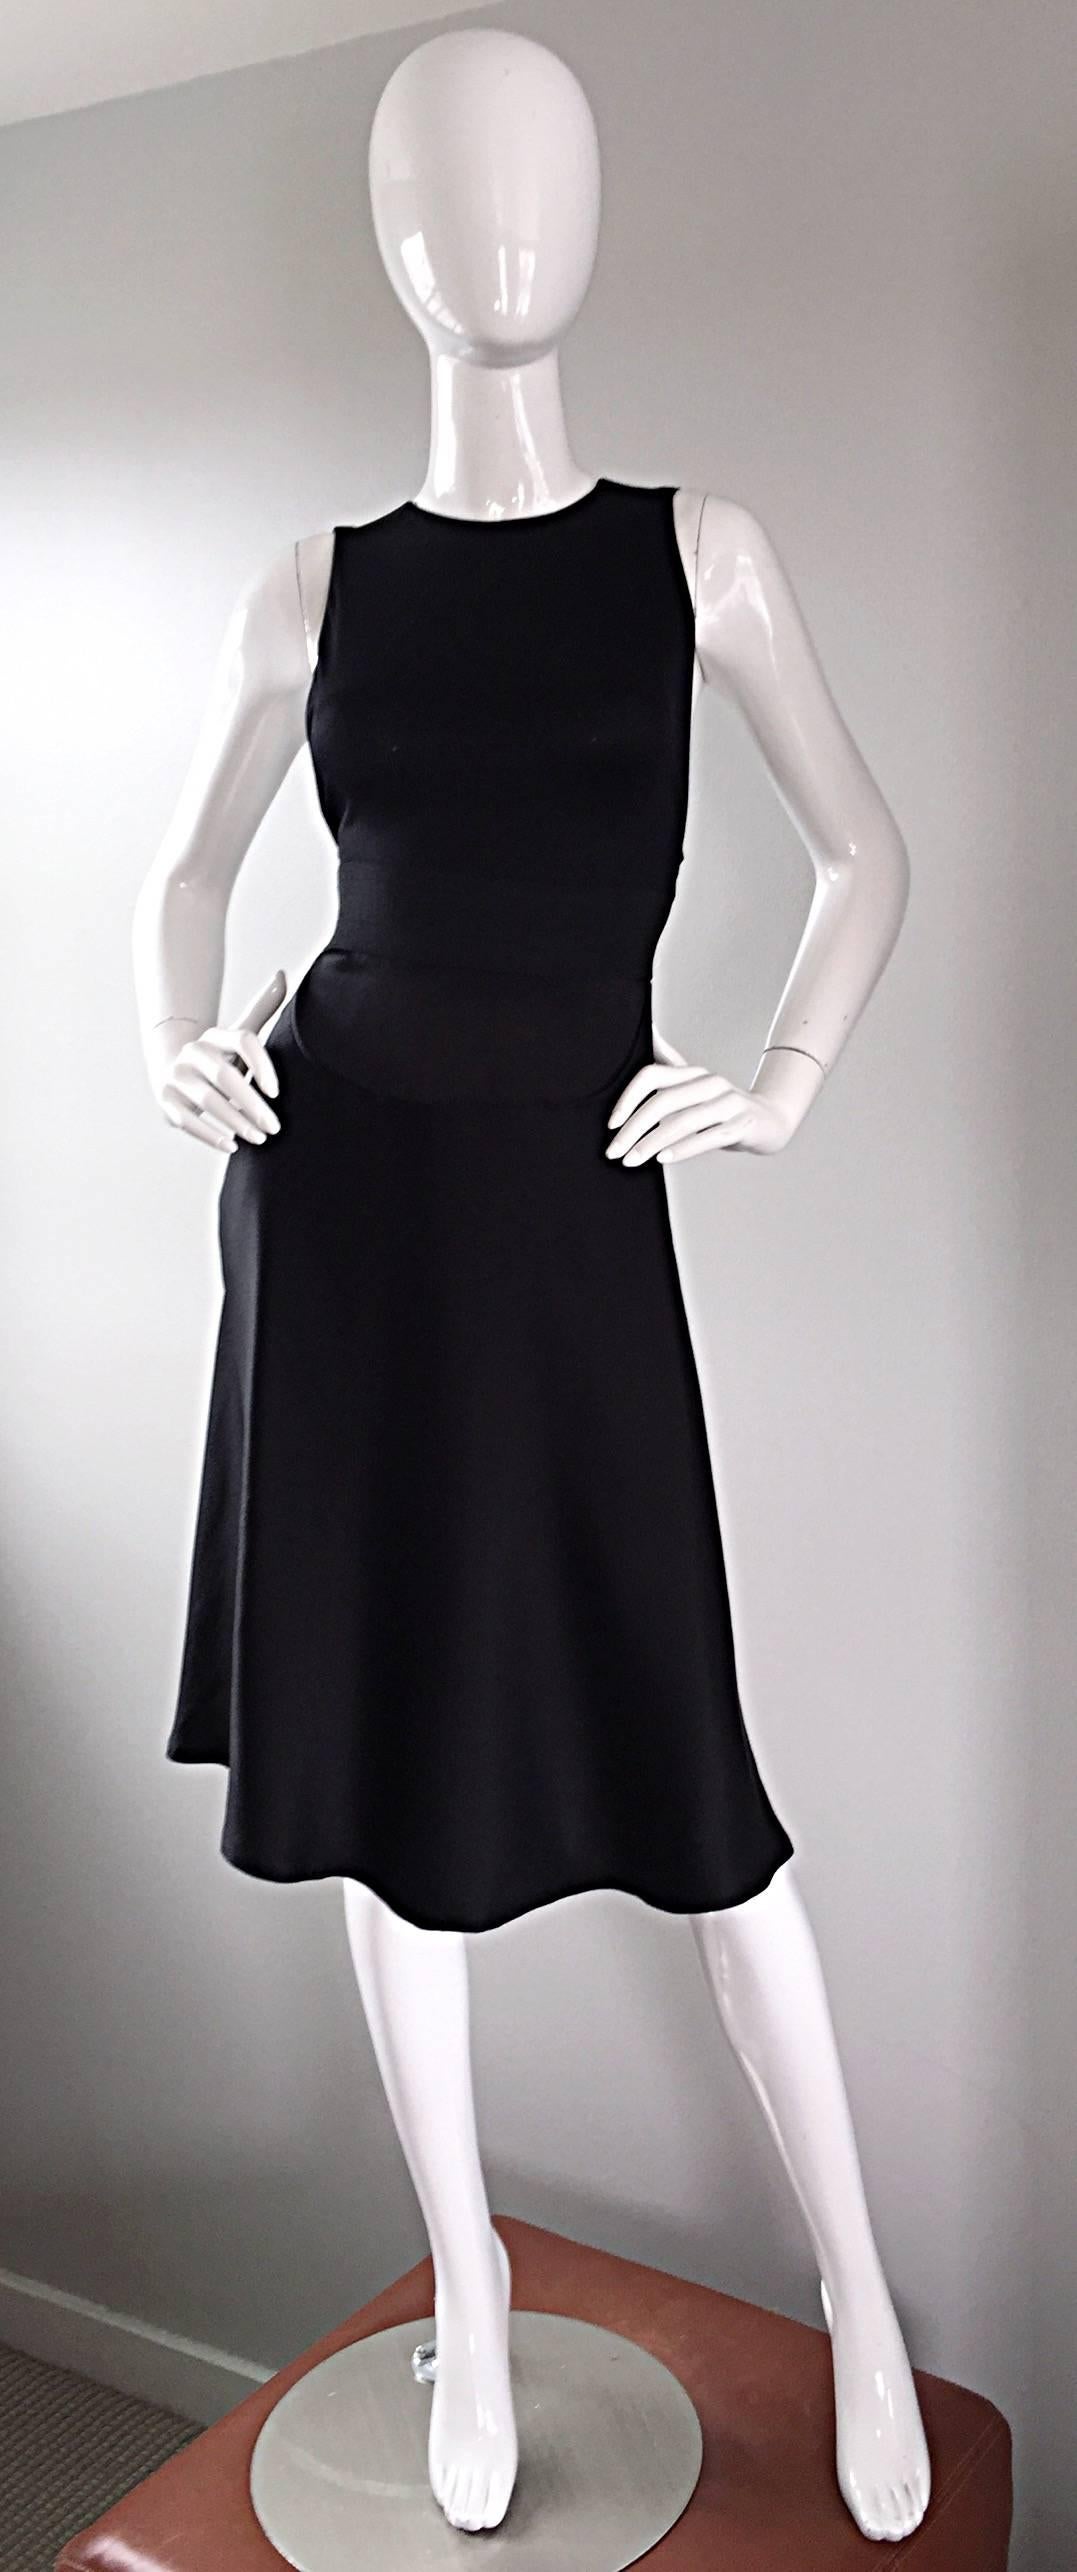 Amazing 90s GEOFFREY BEENE black silk minimalist dress! Features a flattering stretch criss-cross back, with black zipper. Banded waist, with a dipped flounced hem. Hidden zipper up the back of the skirt, with hook-and-eye closure. Signature Beene